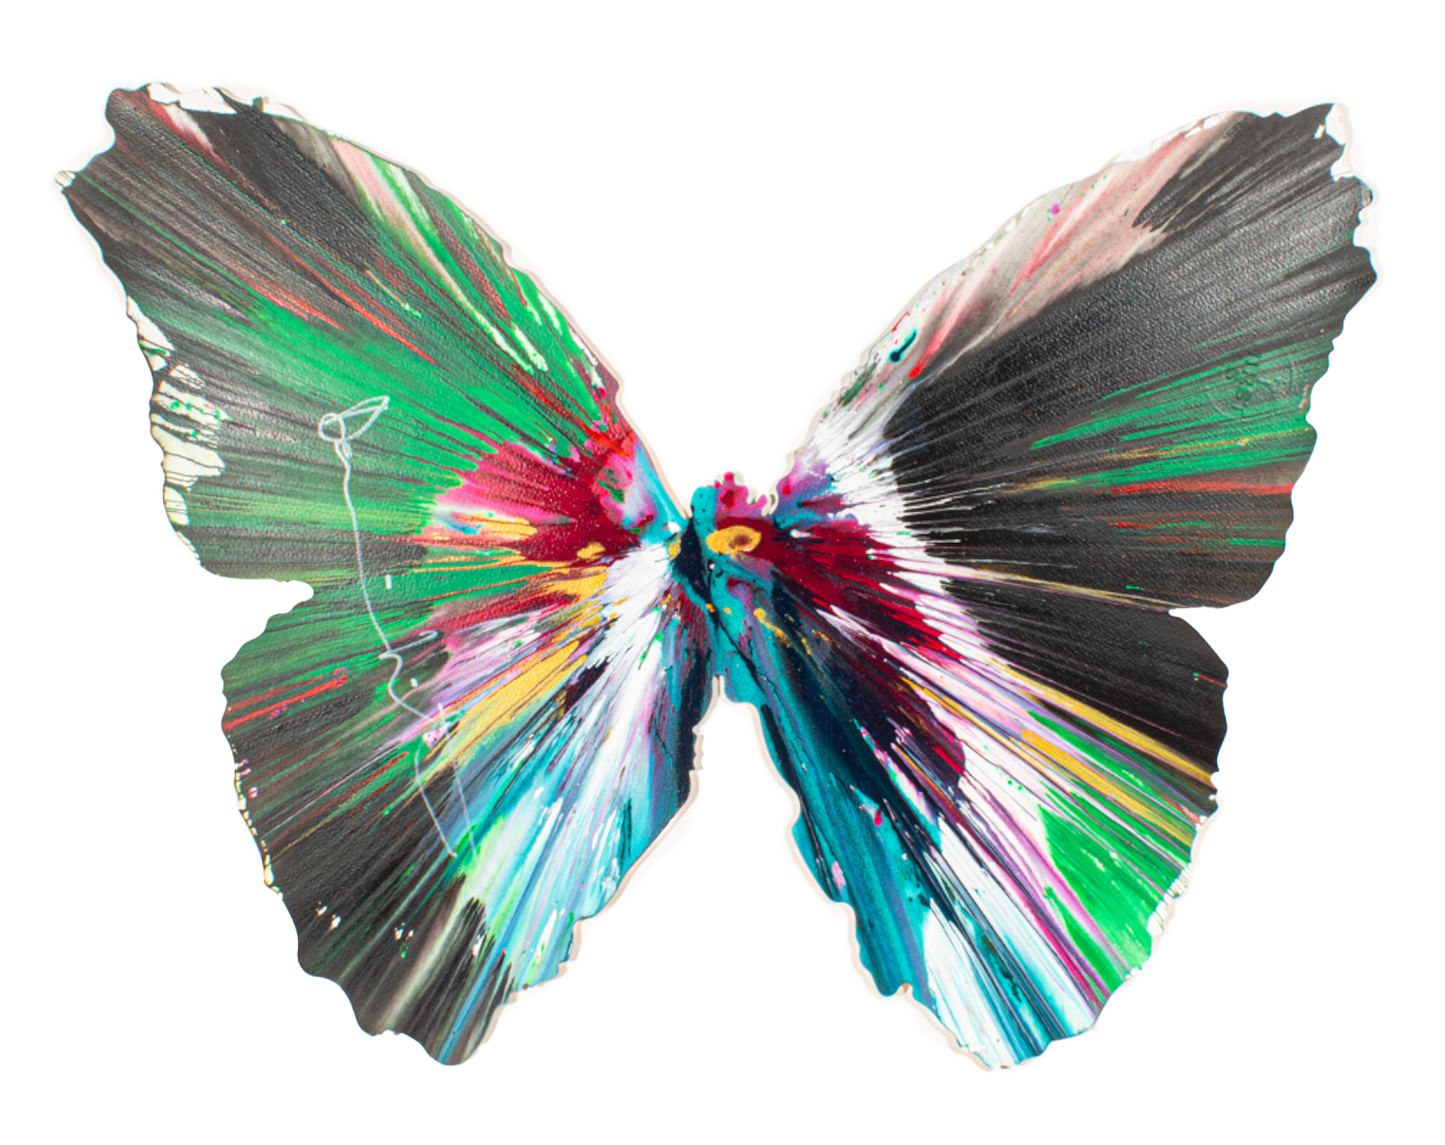 Damien Hirst - Butterfly